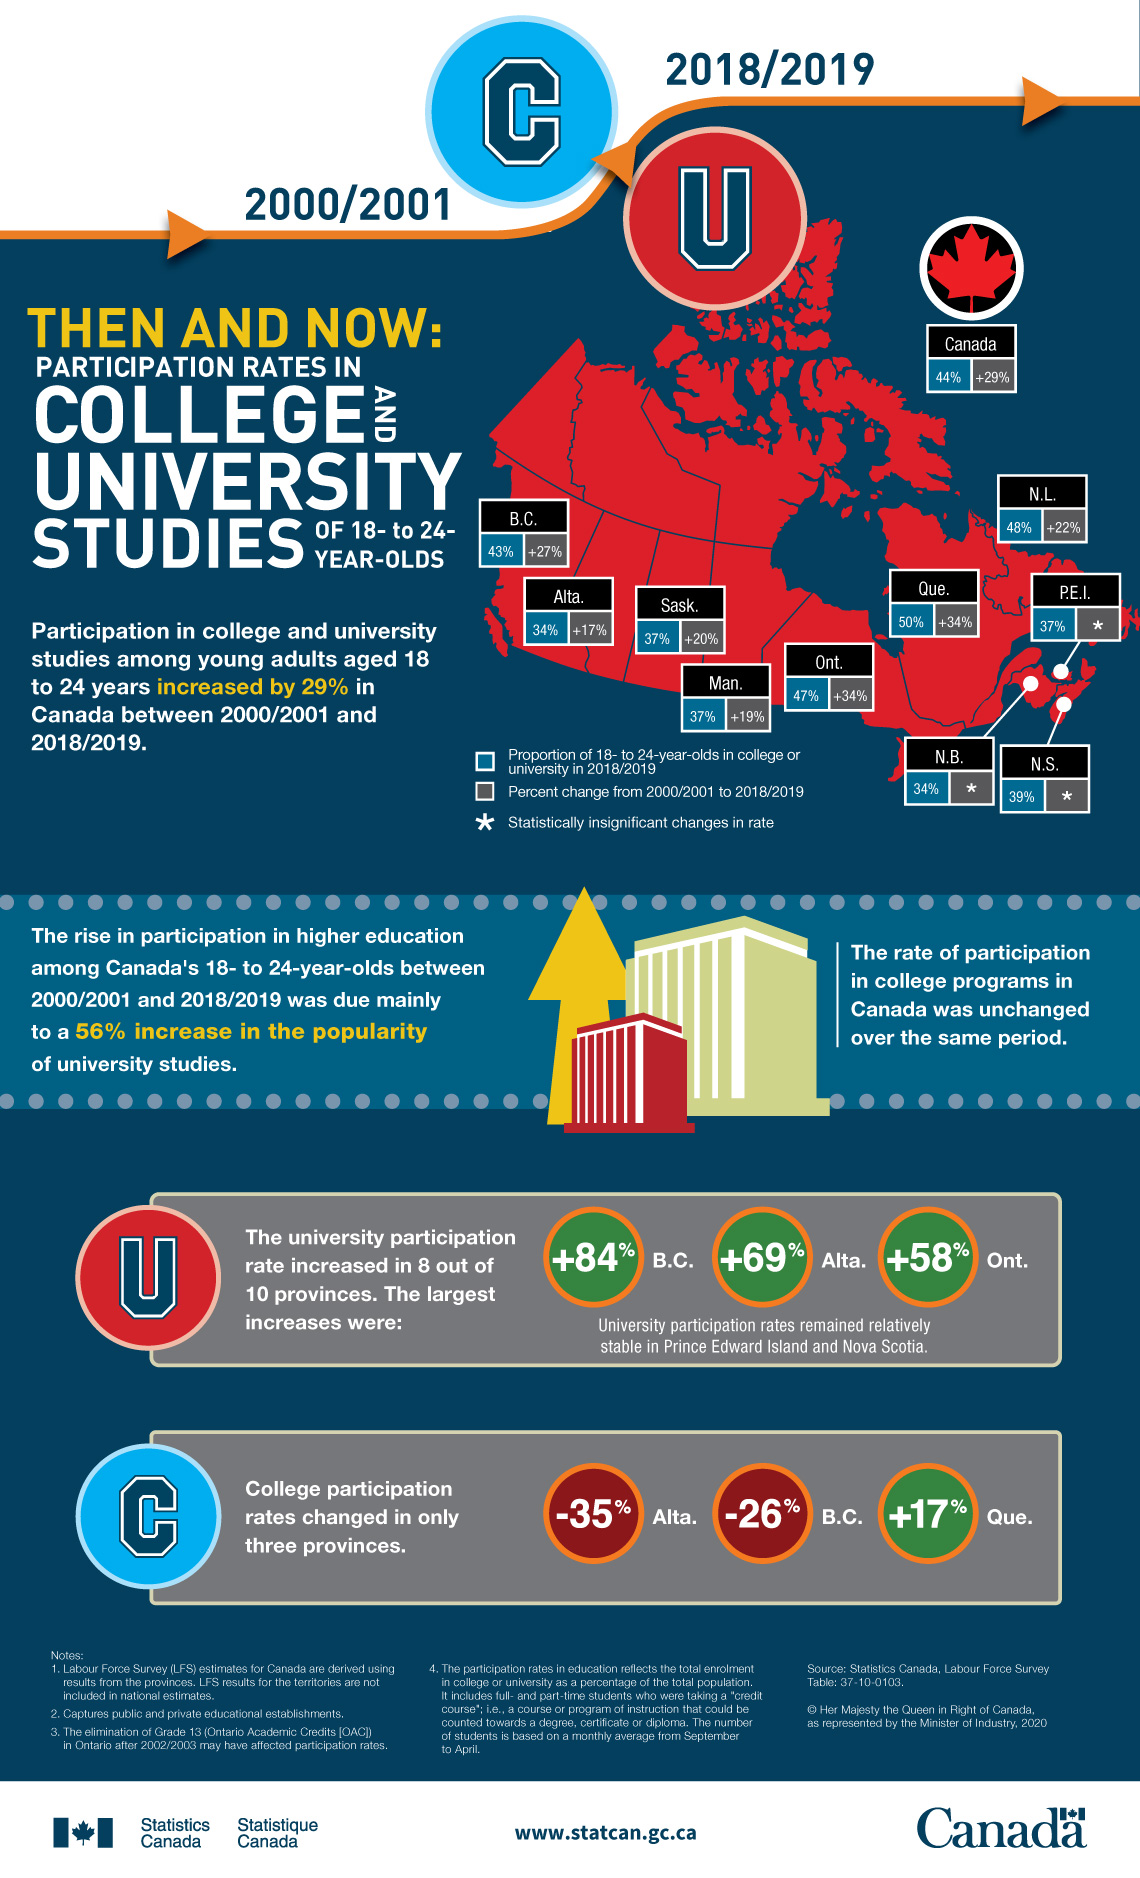 Infographic: Then and now: Participation rates in college and university studies of 18- to 24-year-olds